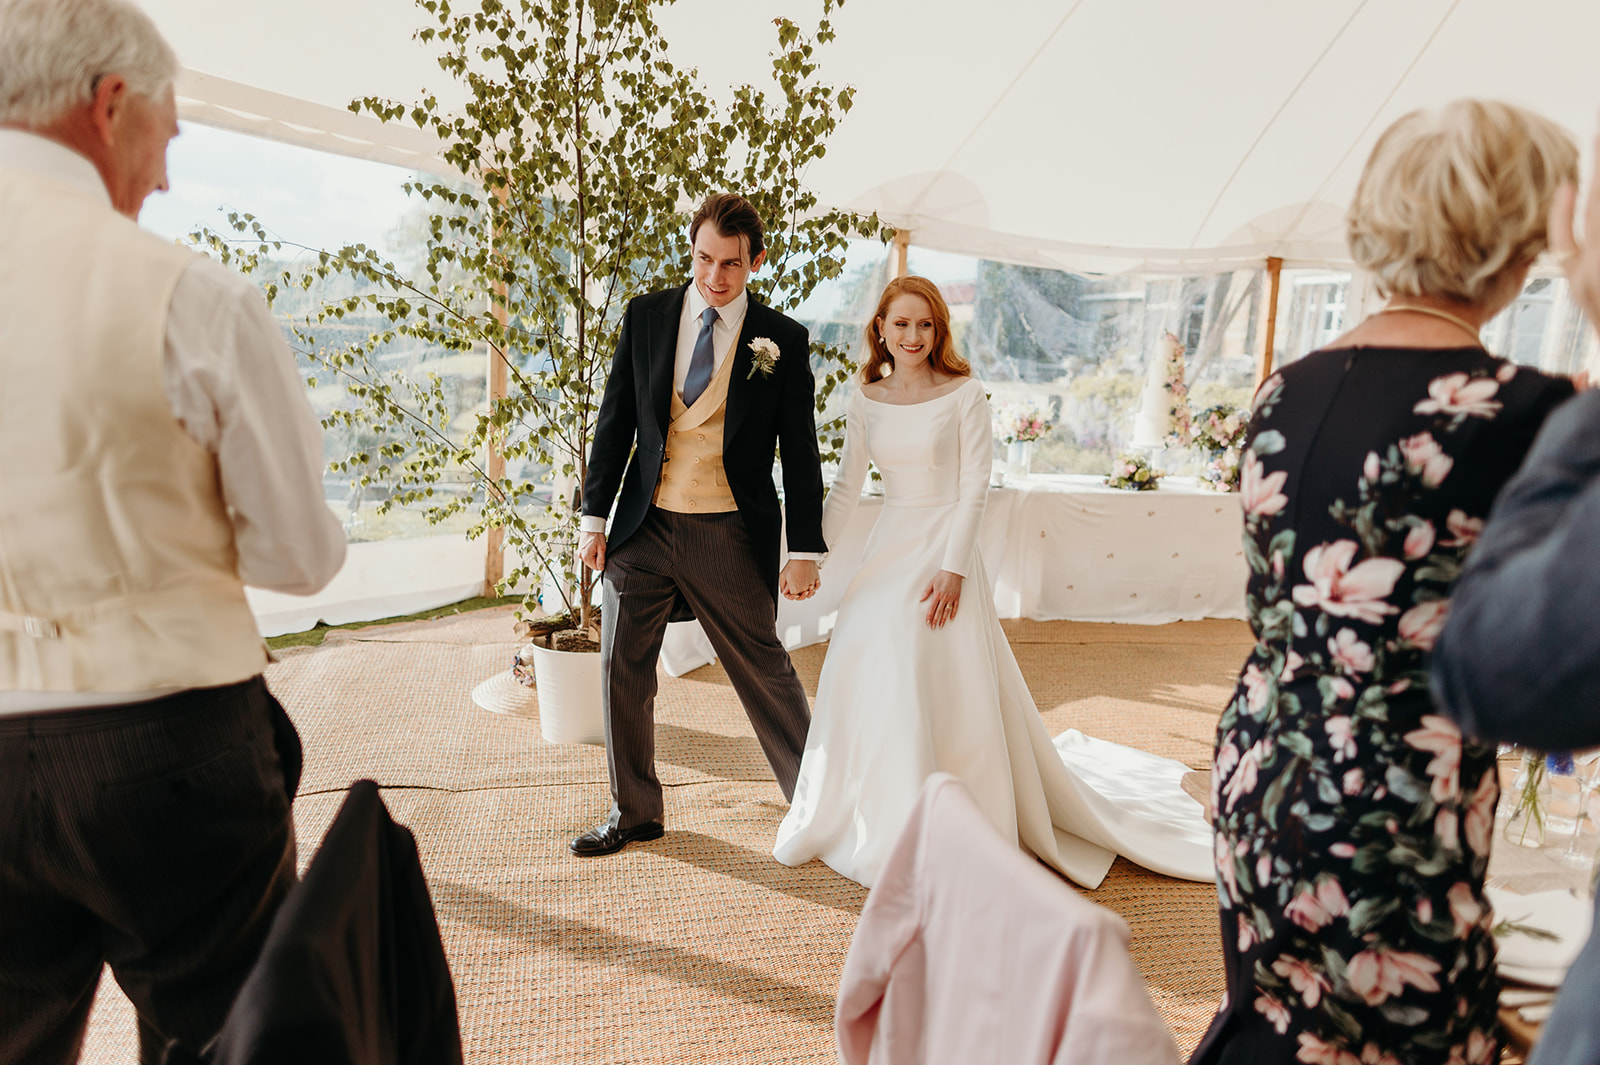 The couple's entrance heralded by cheers at their Buckhurst Park wedding reception.